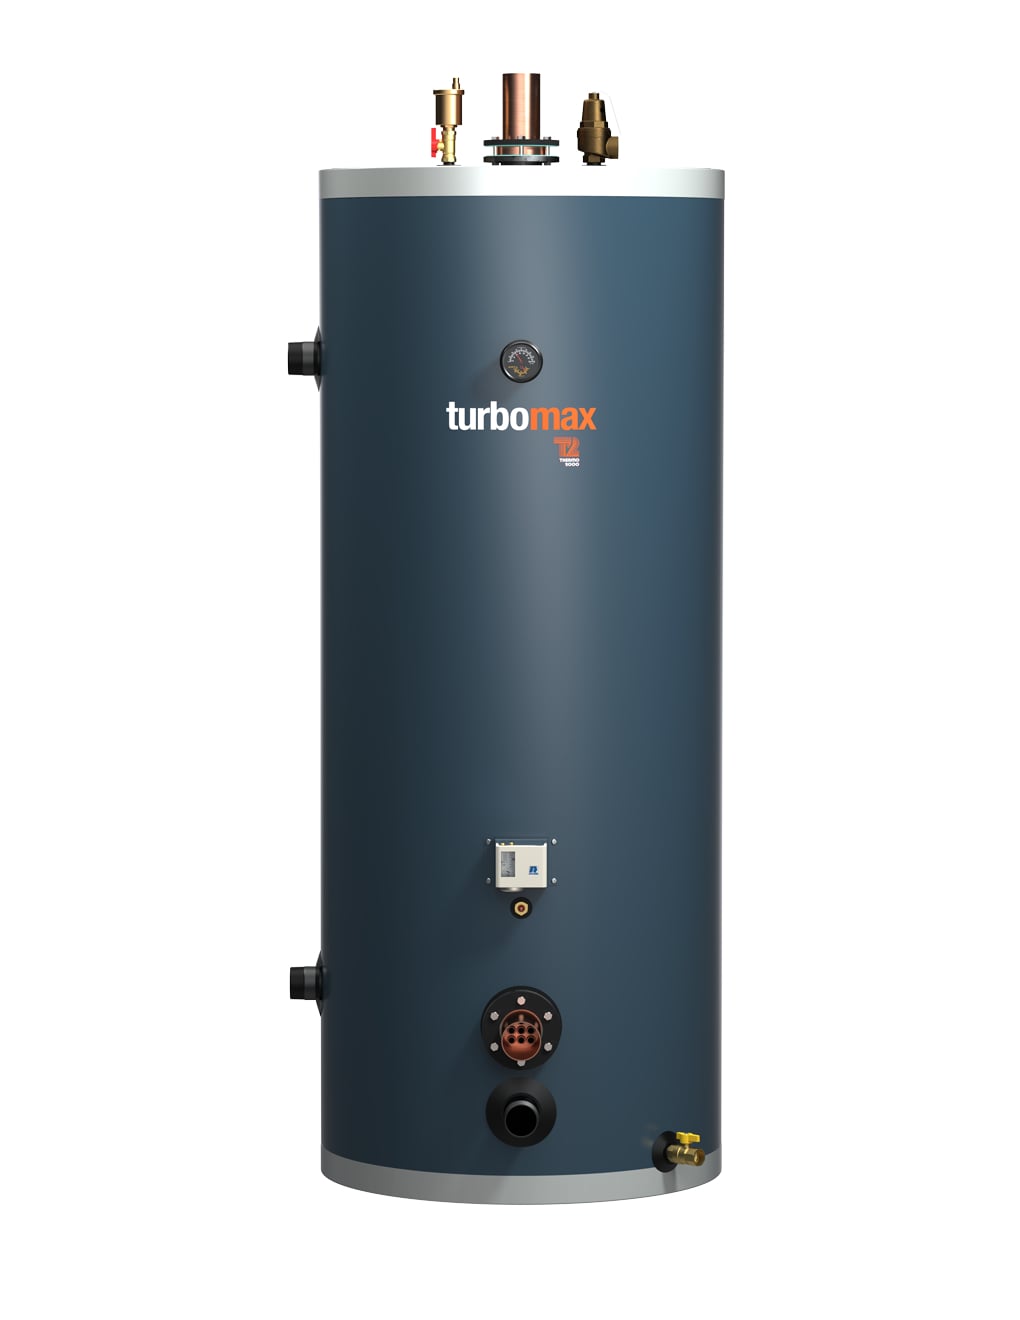 Thermo 2000 Turbomax Indirect Water Heater